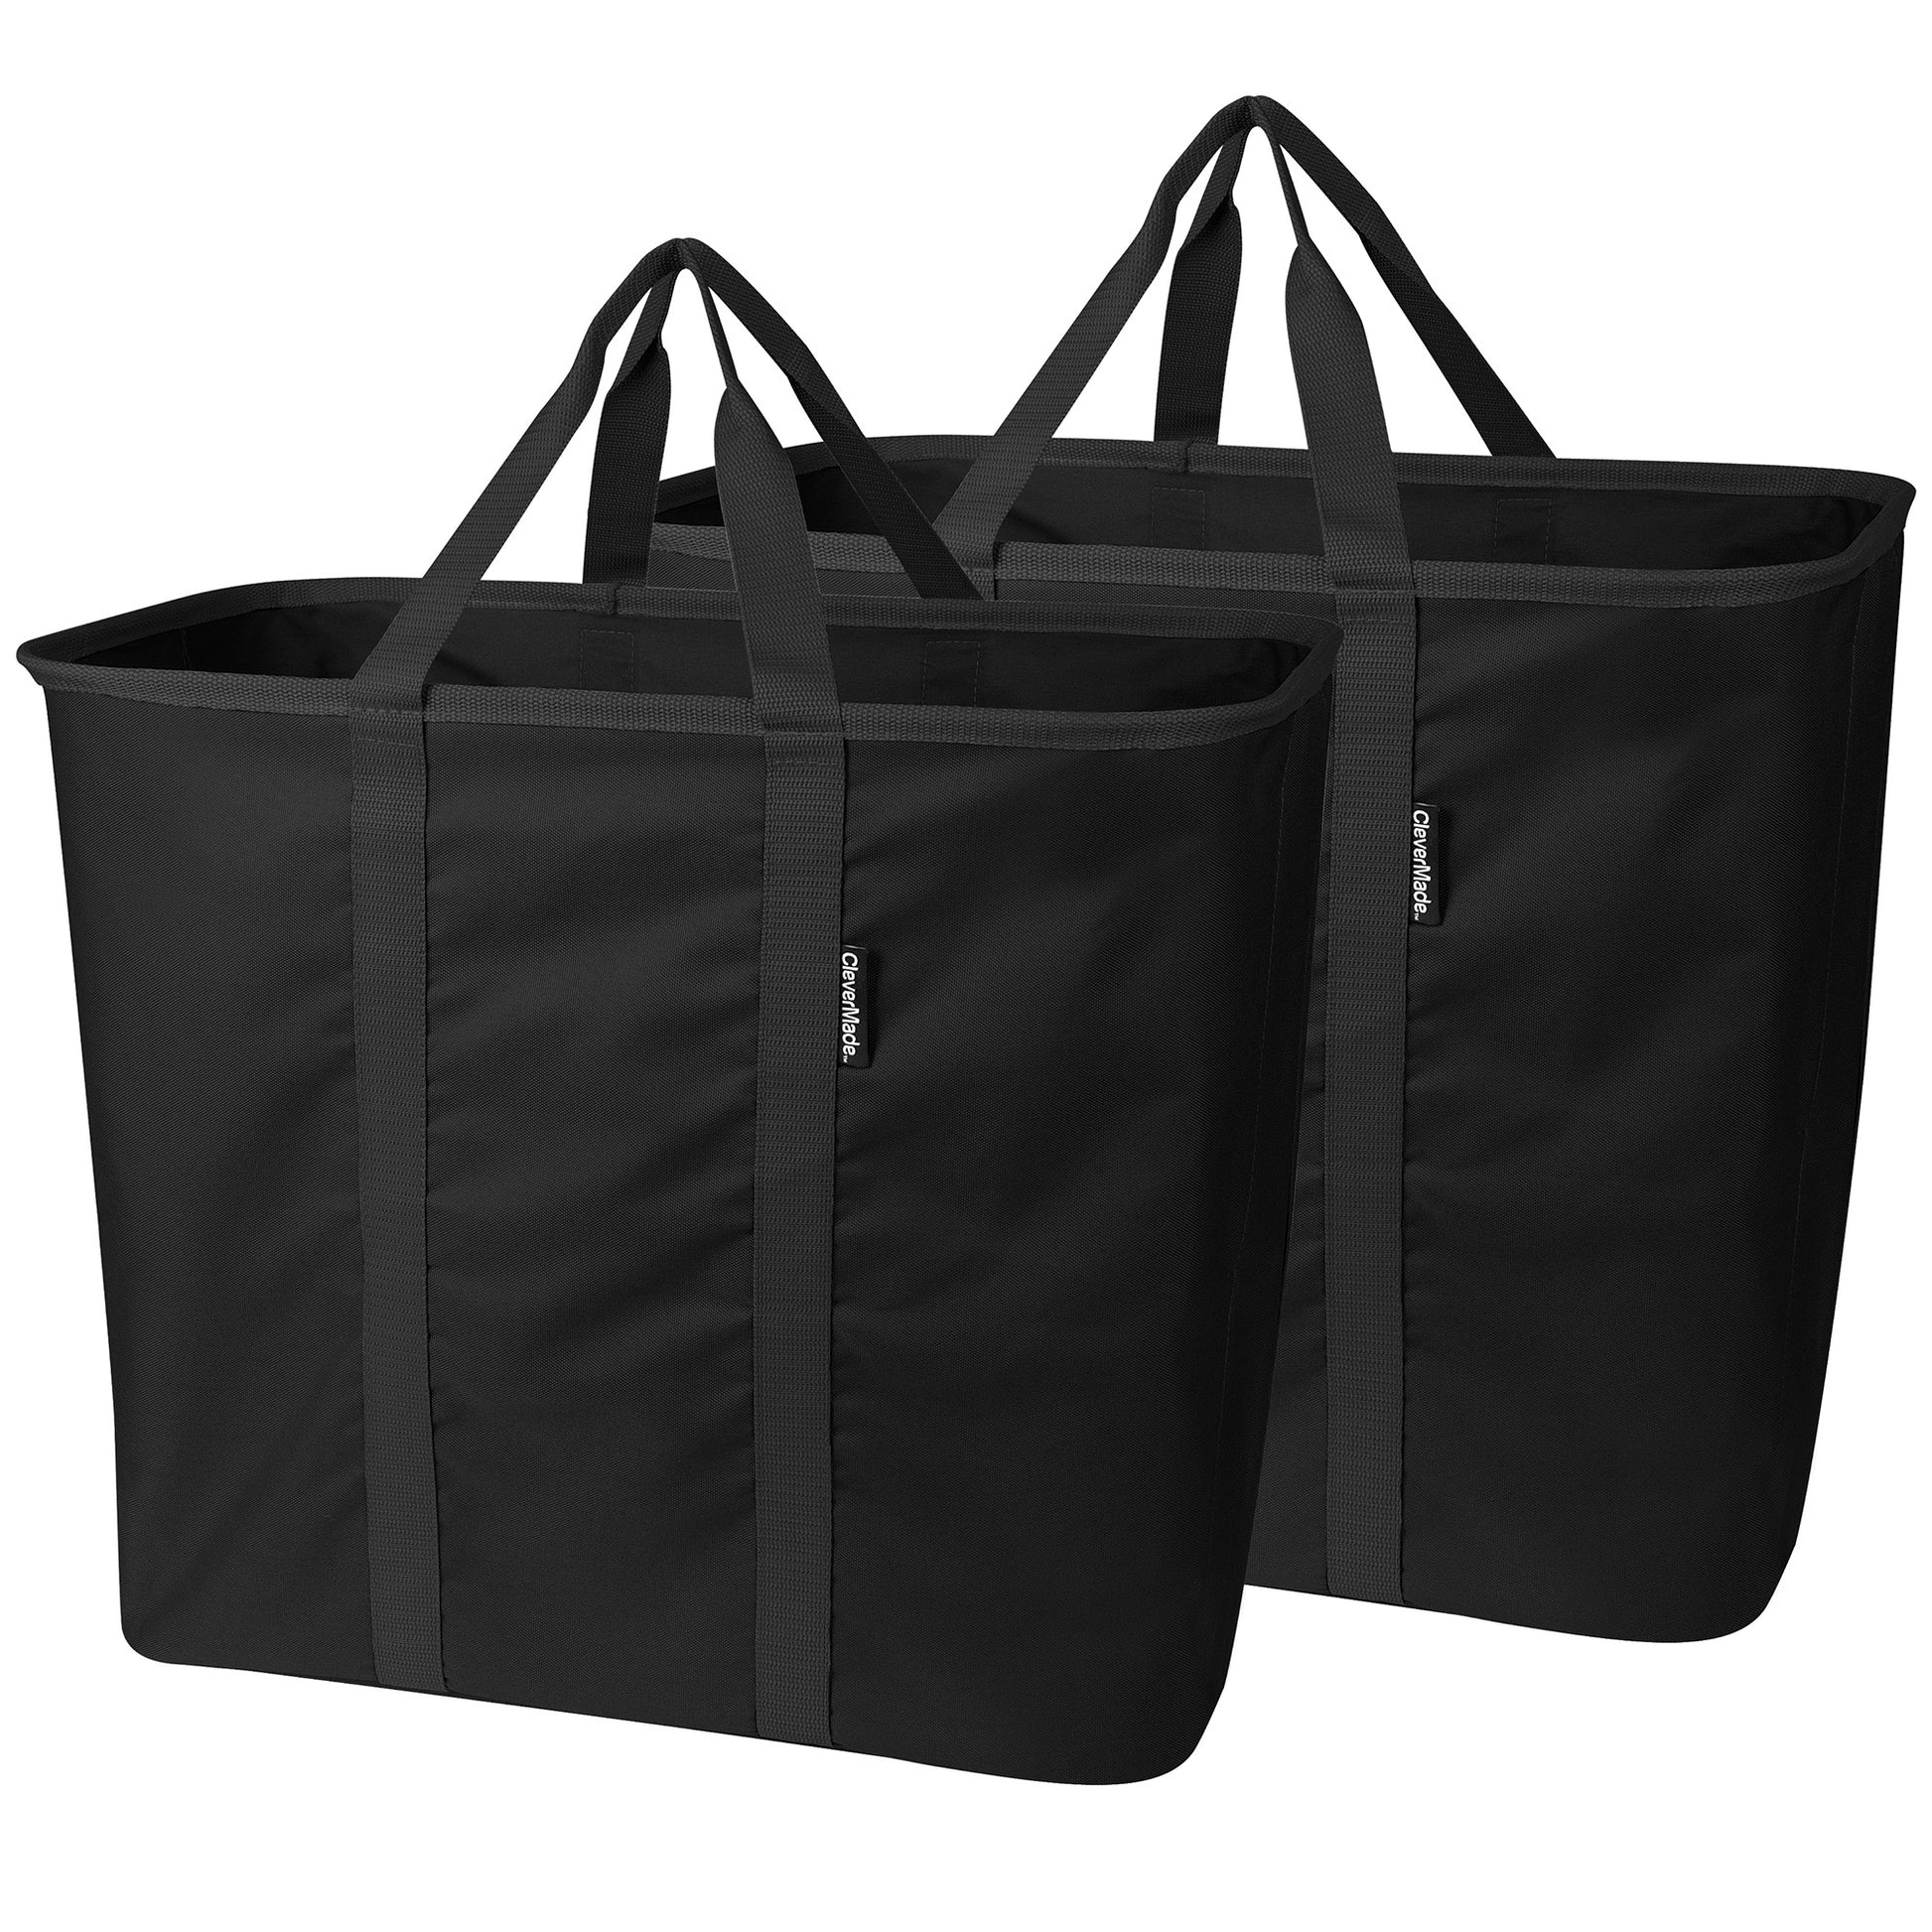 All Purpose Laundry Caddy, 2-Pack